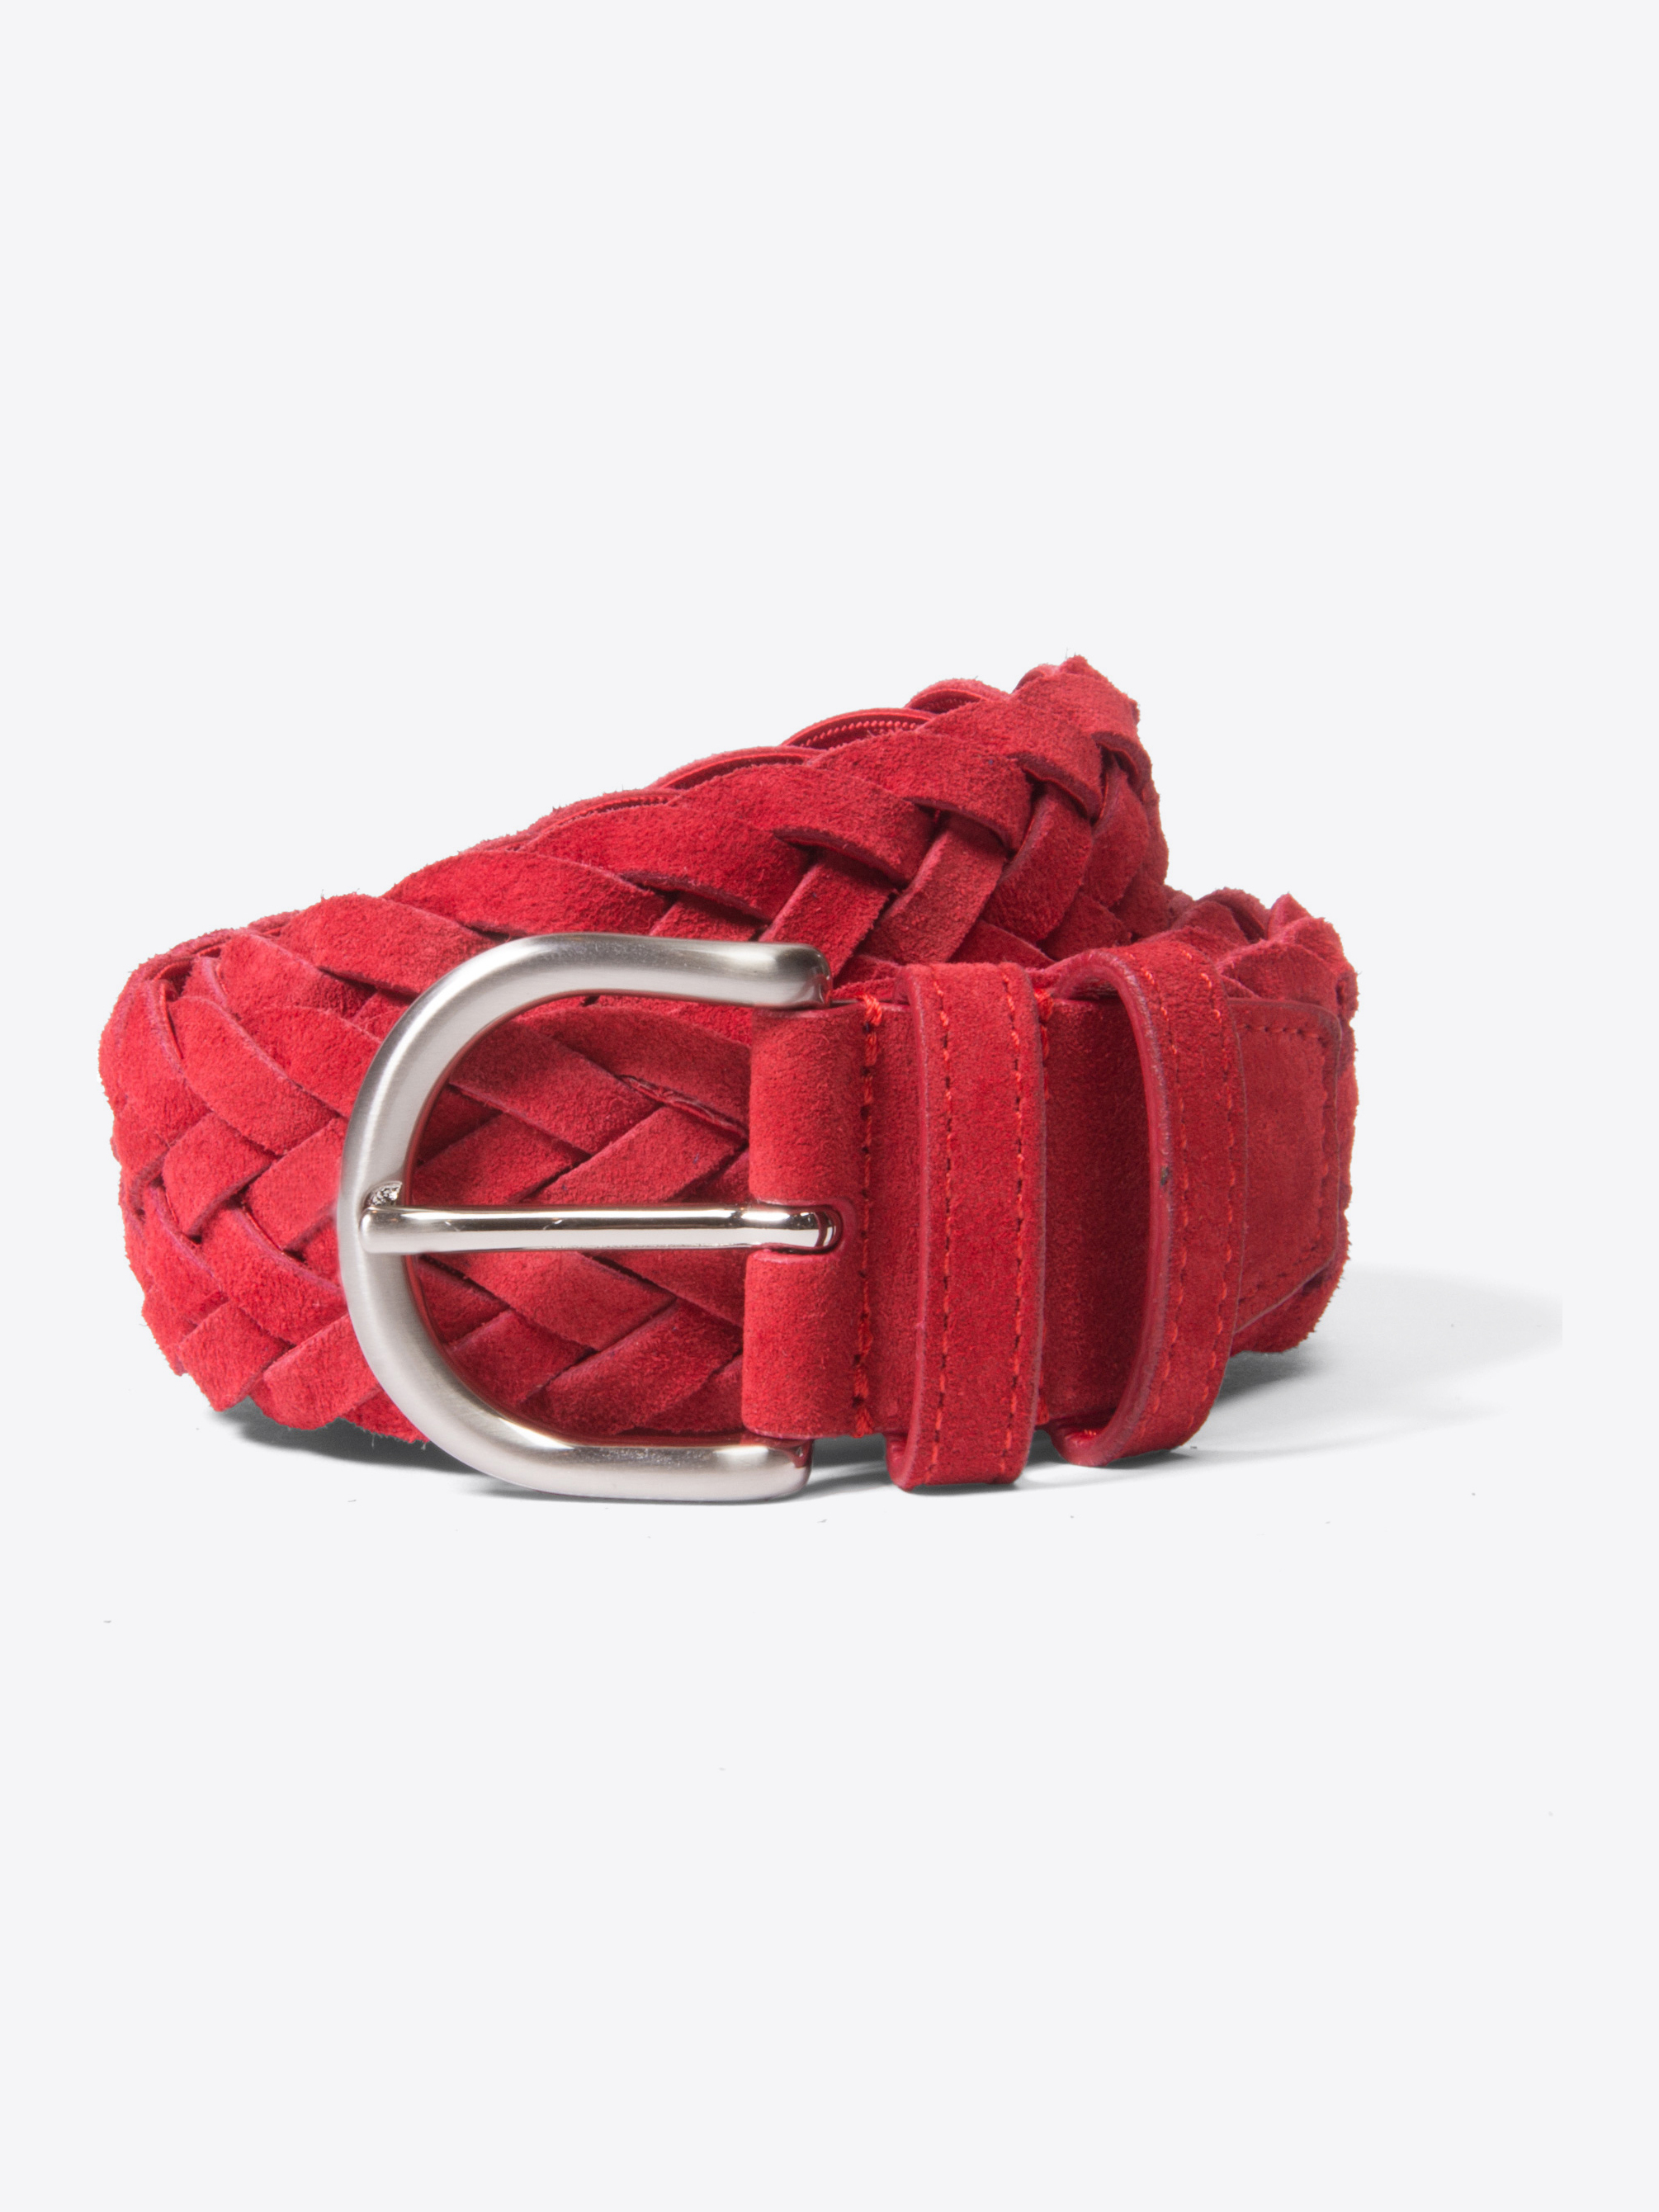 Zoom Image of Red Suede Braided Belt